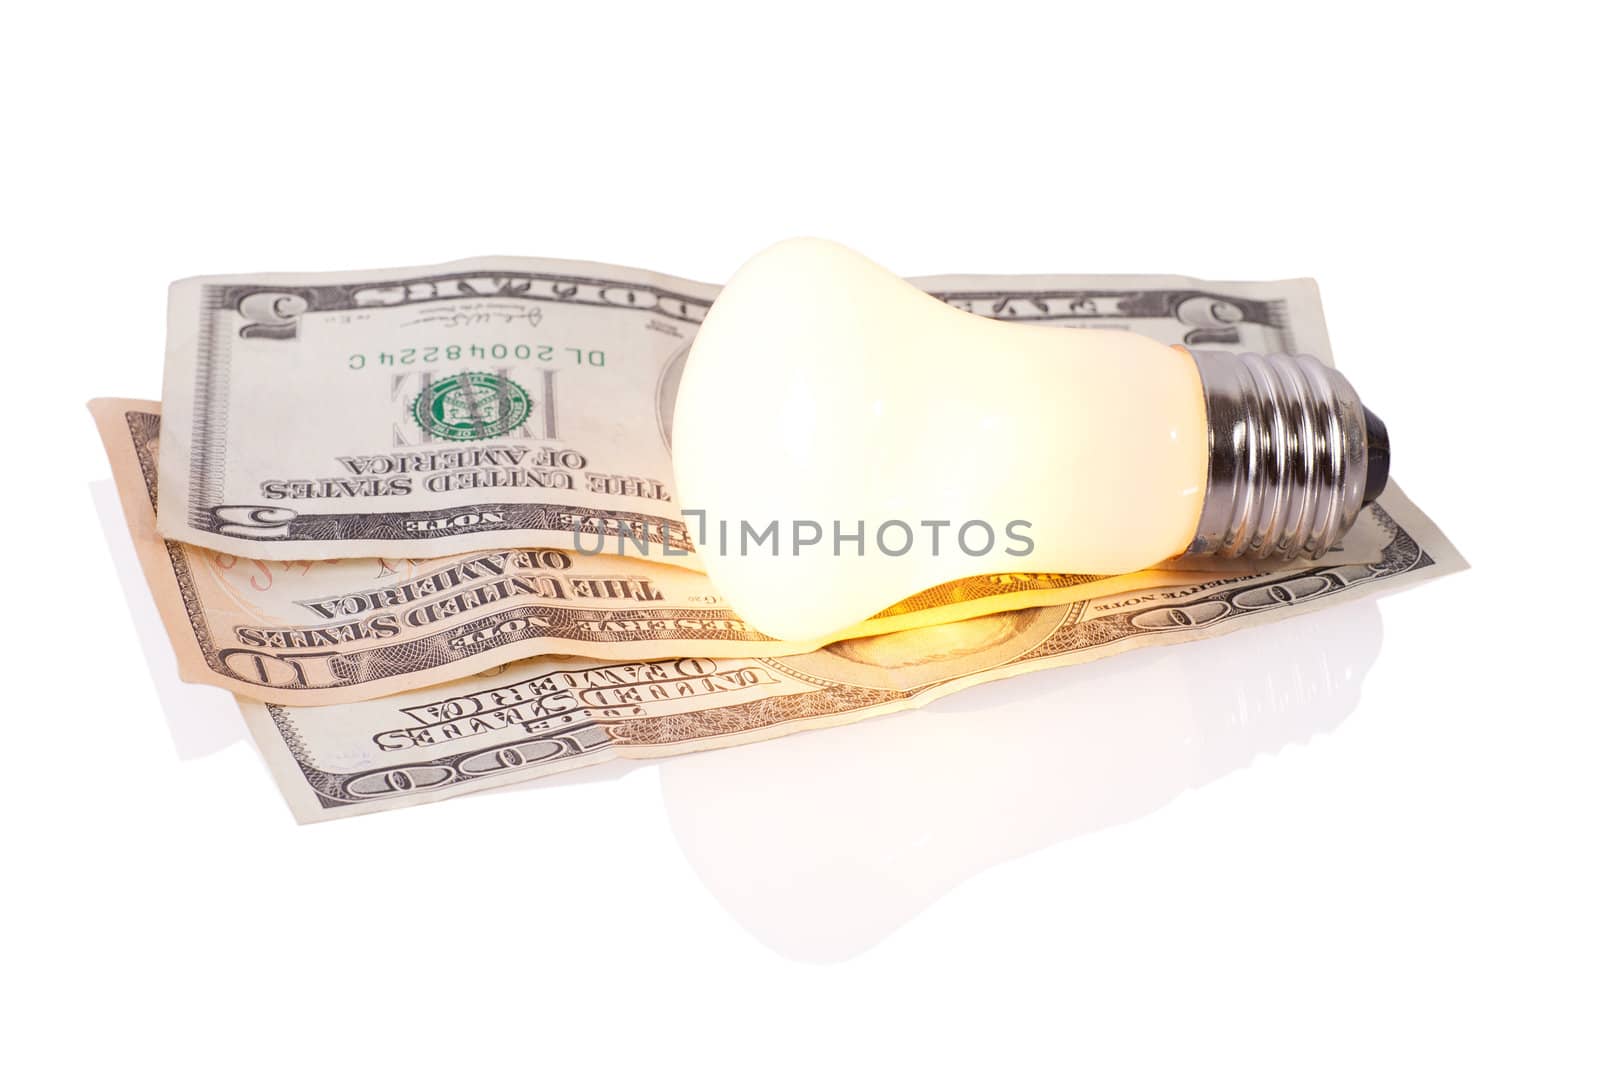 Old style bulb on dollars isolated on white